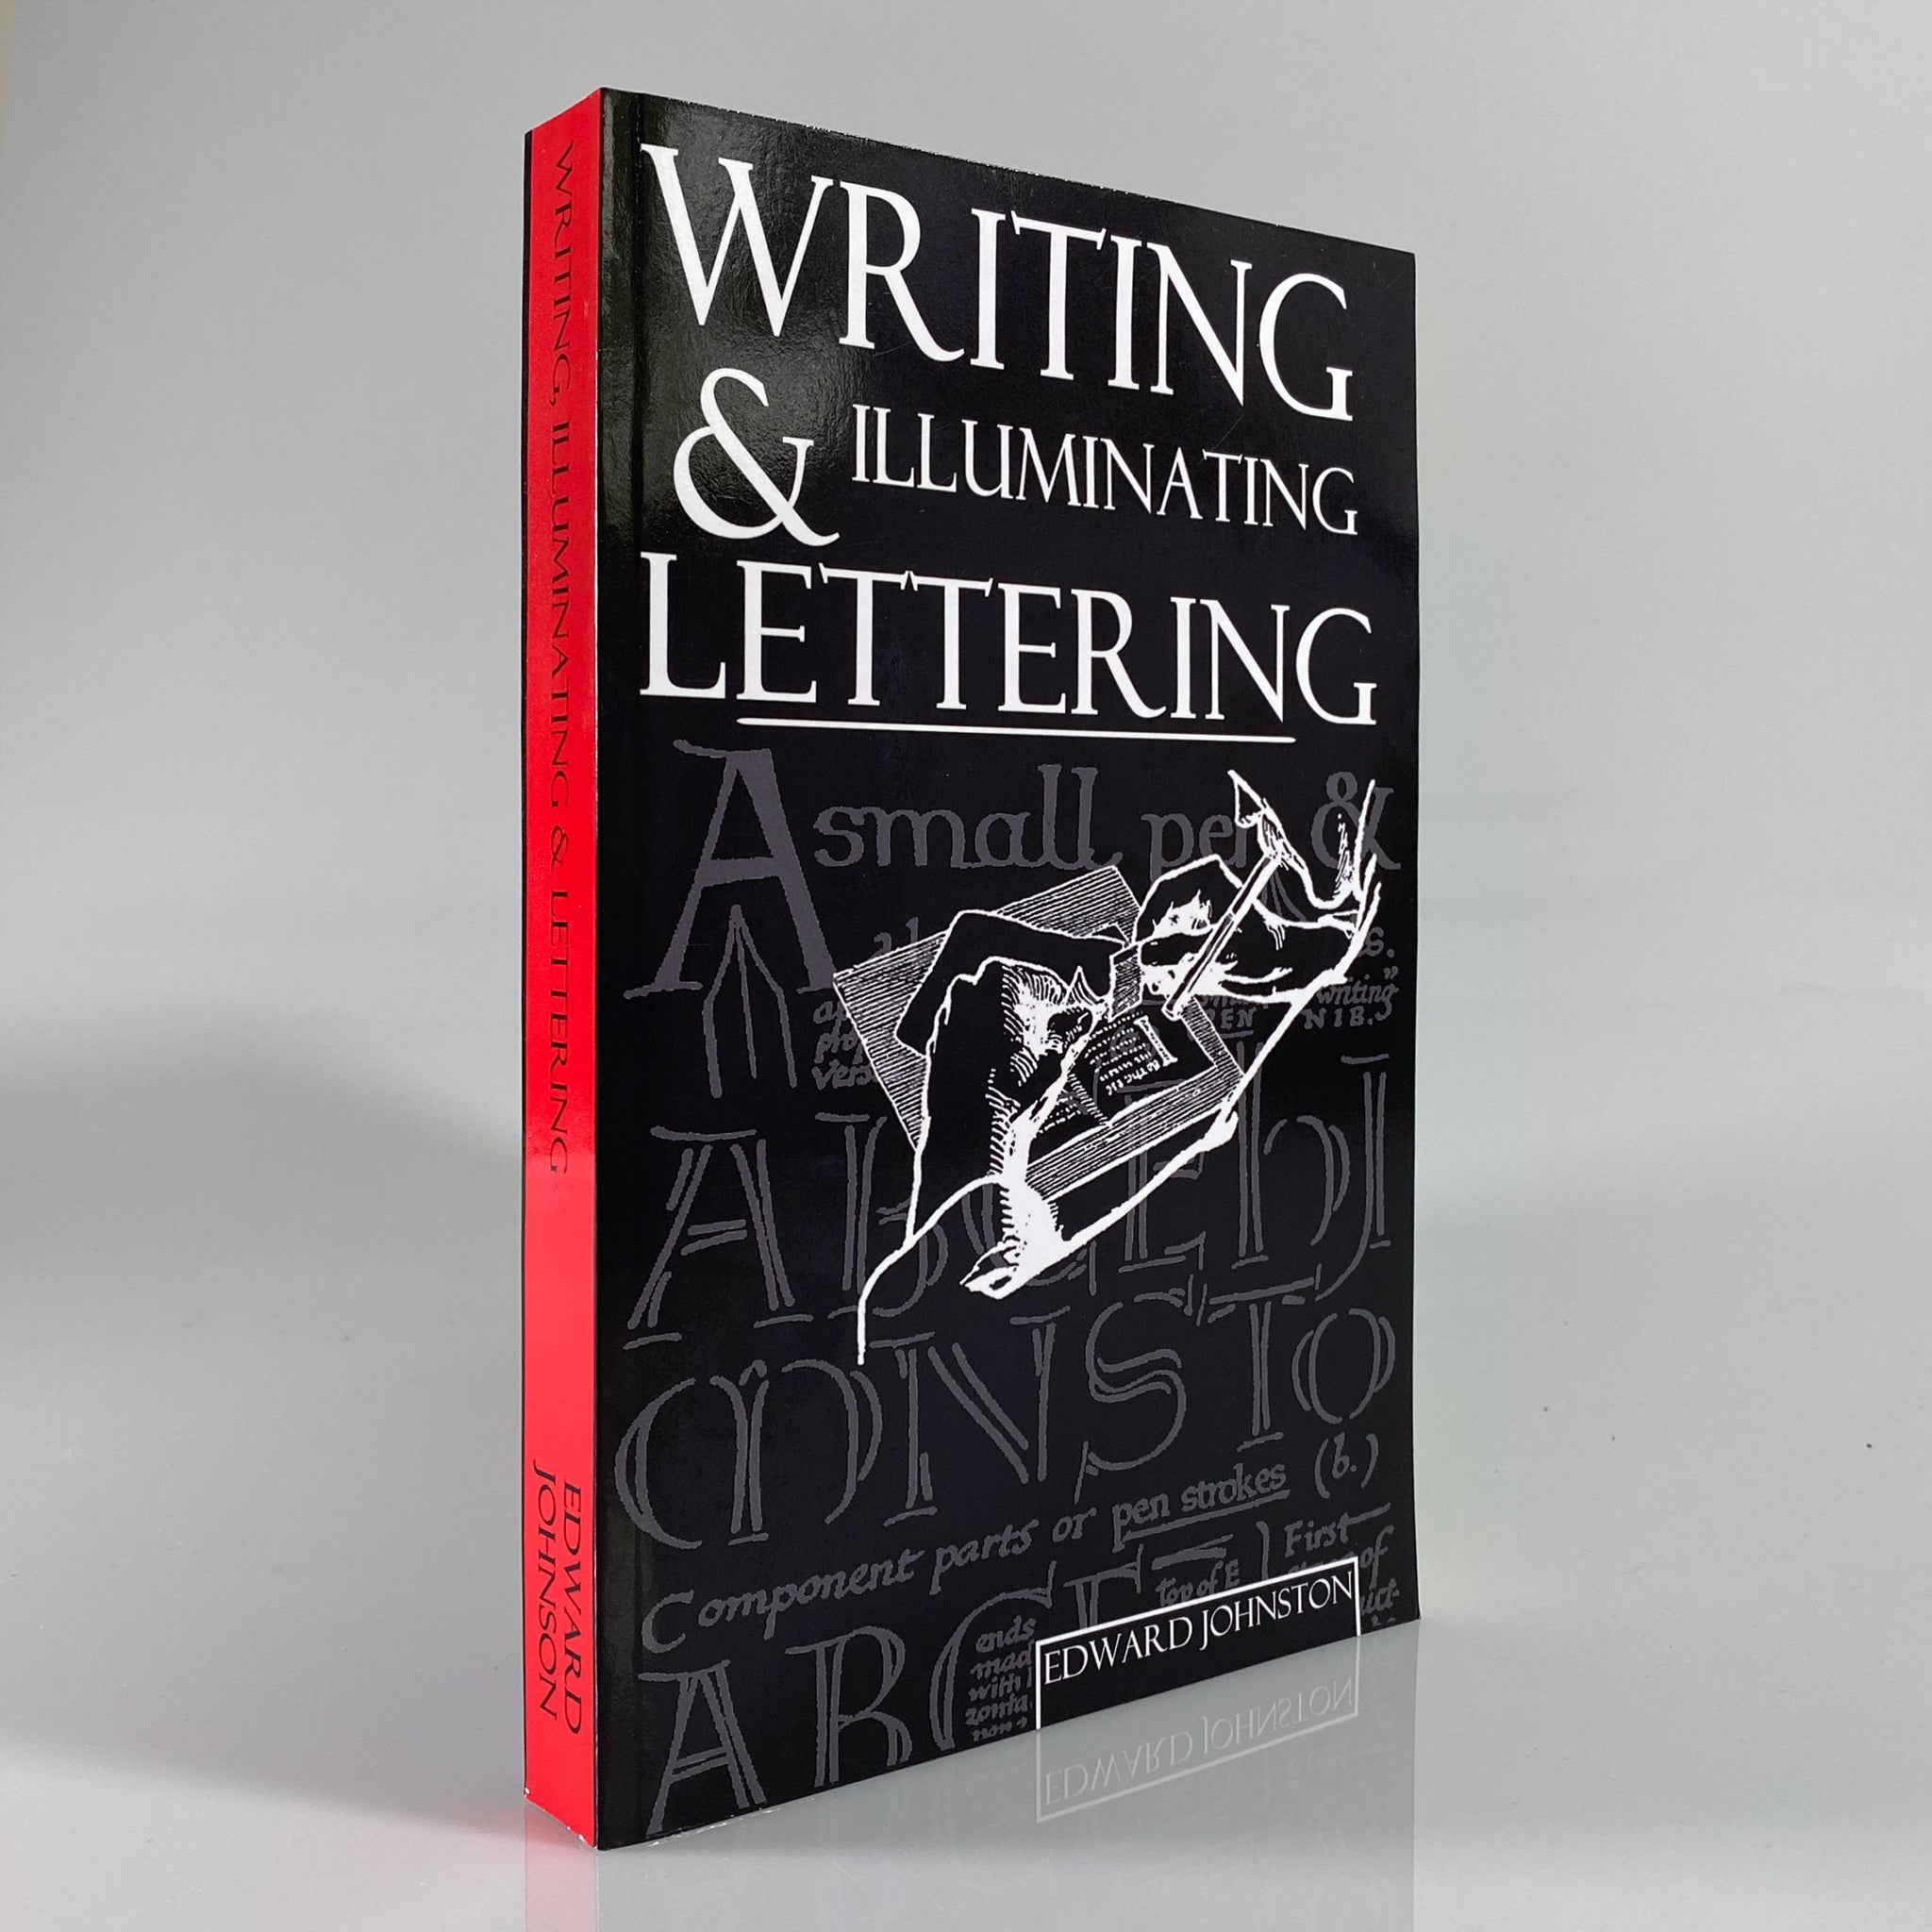 Writing, Illuminating, and Lettering